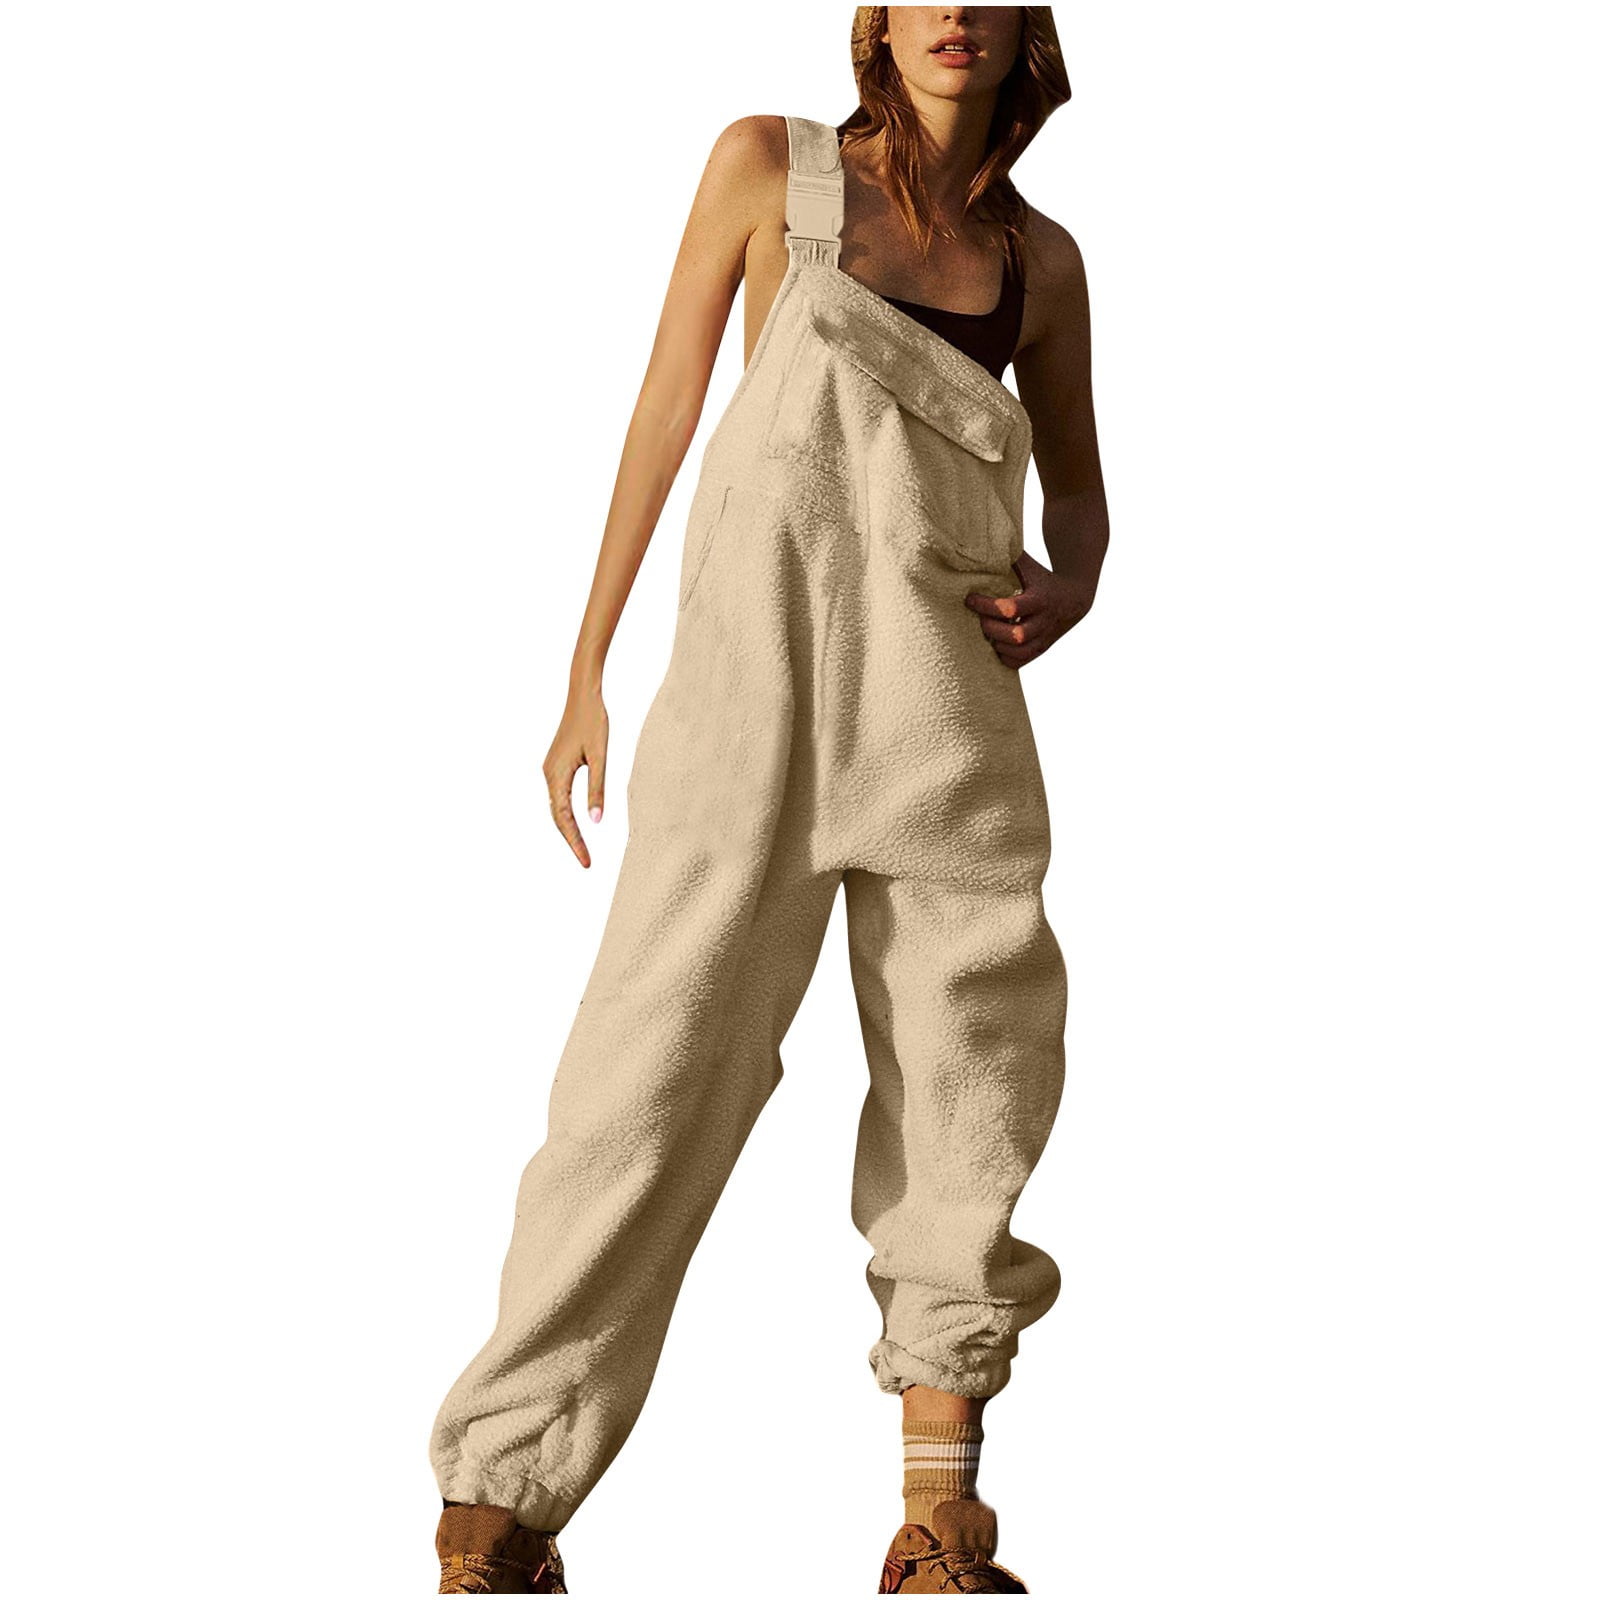 Flash Pick SMihono Trendy Girls Relaxed Fit Comfy Long Pants Overalls  Womens Fleece Overalls Onepiece Jumpsuits Adjustable Suspender Straps Warm